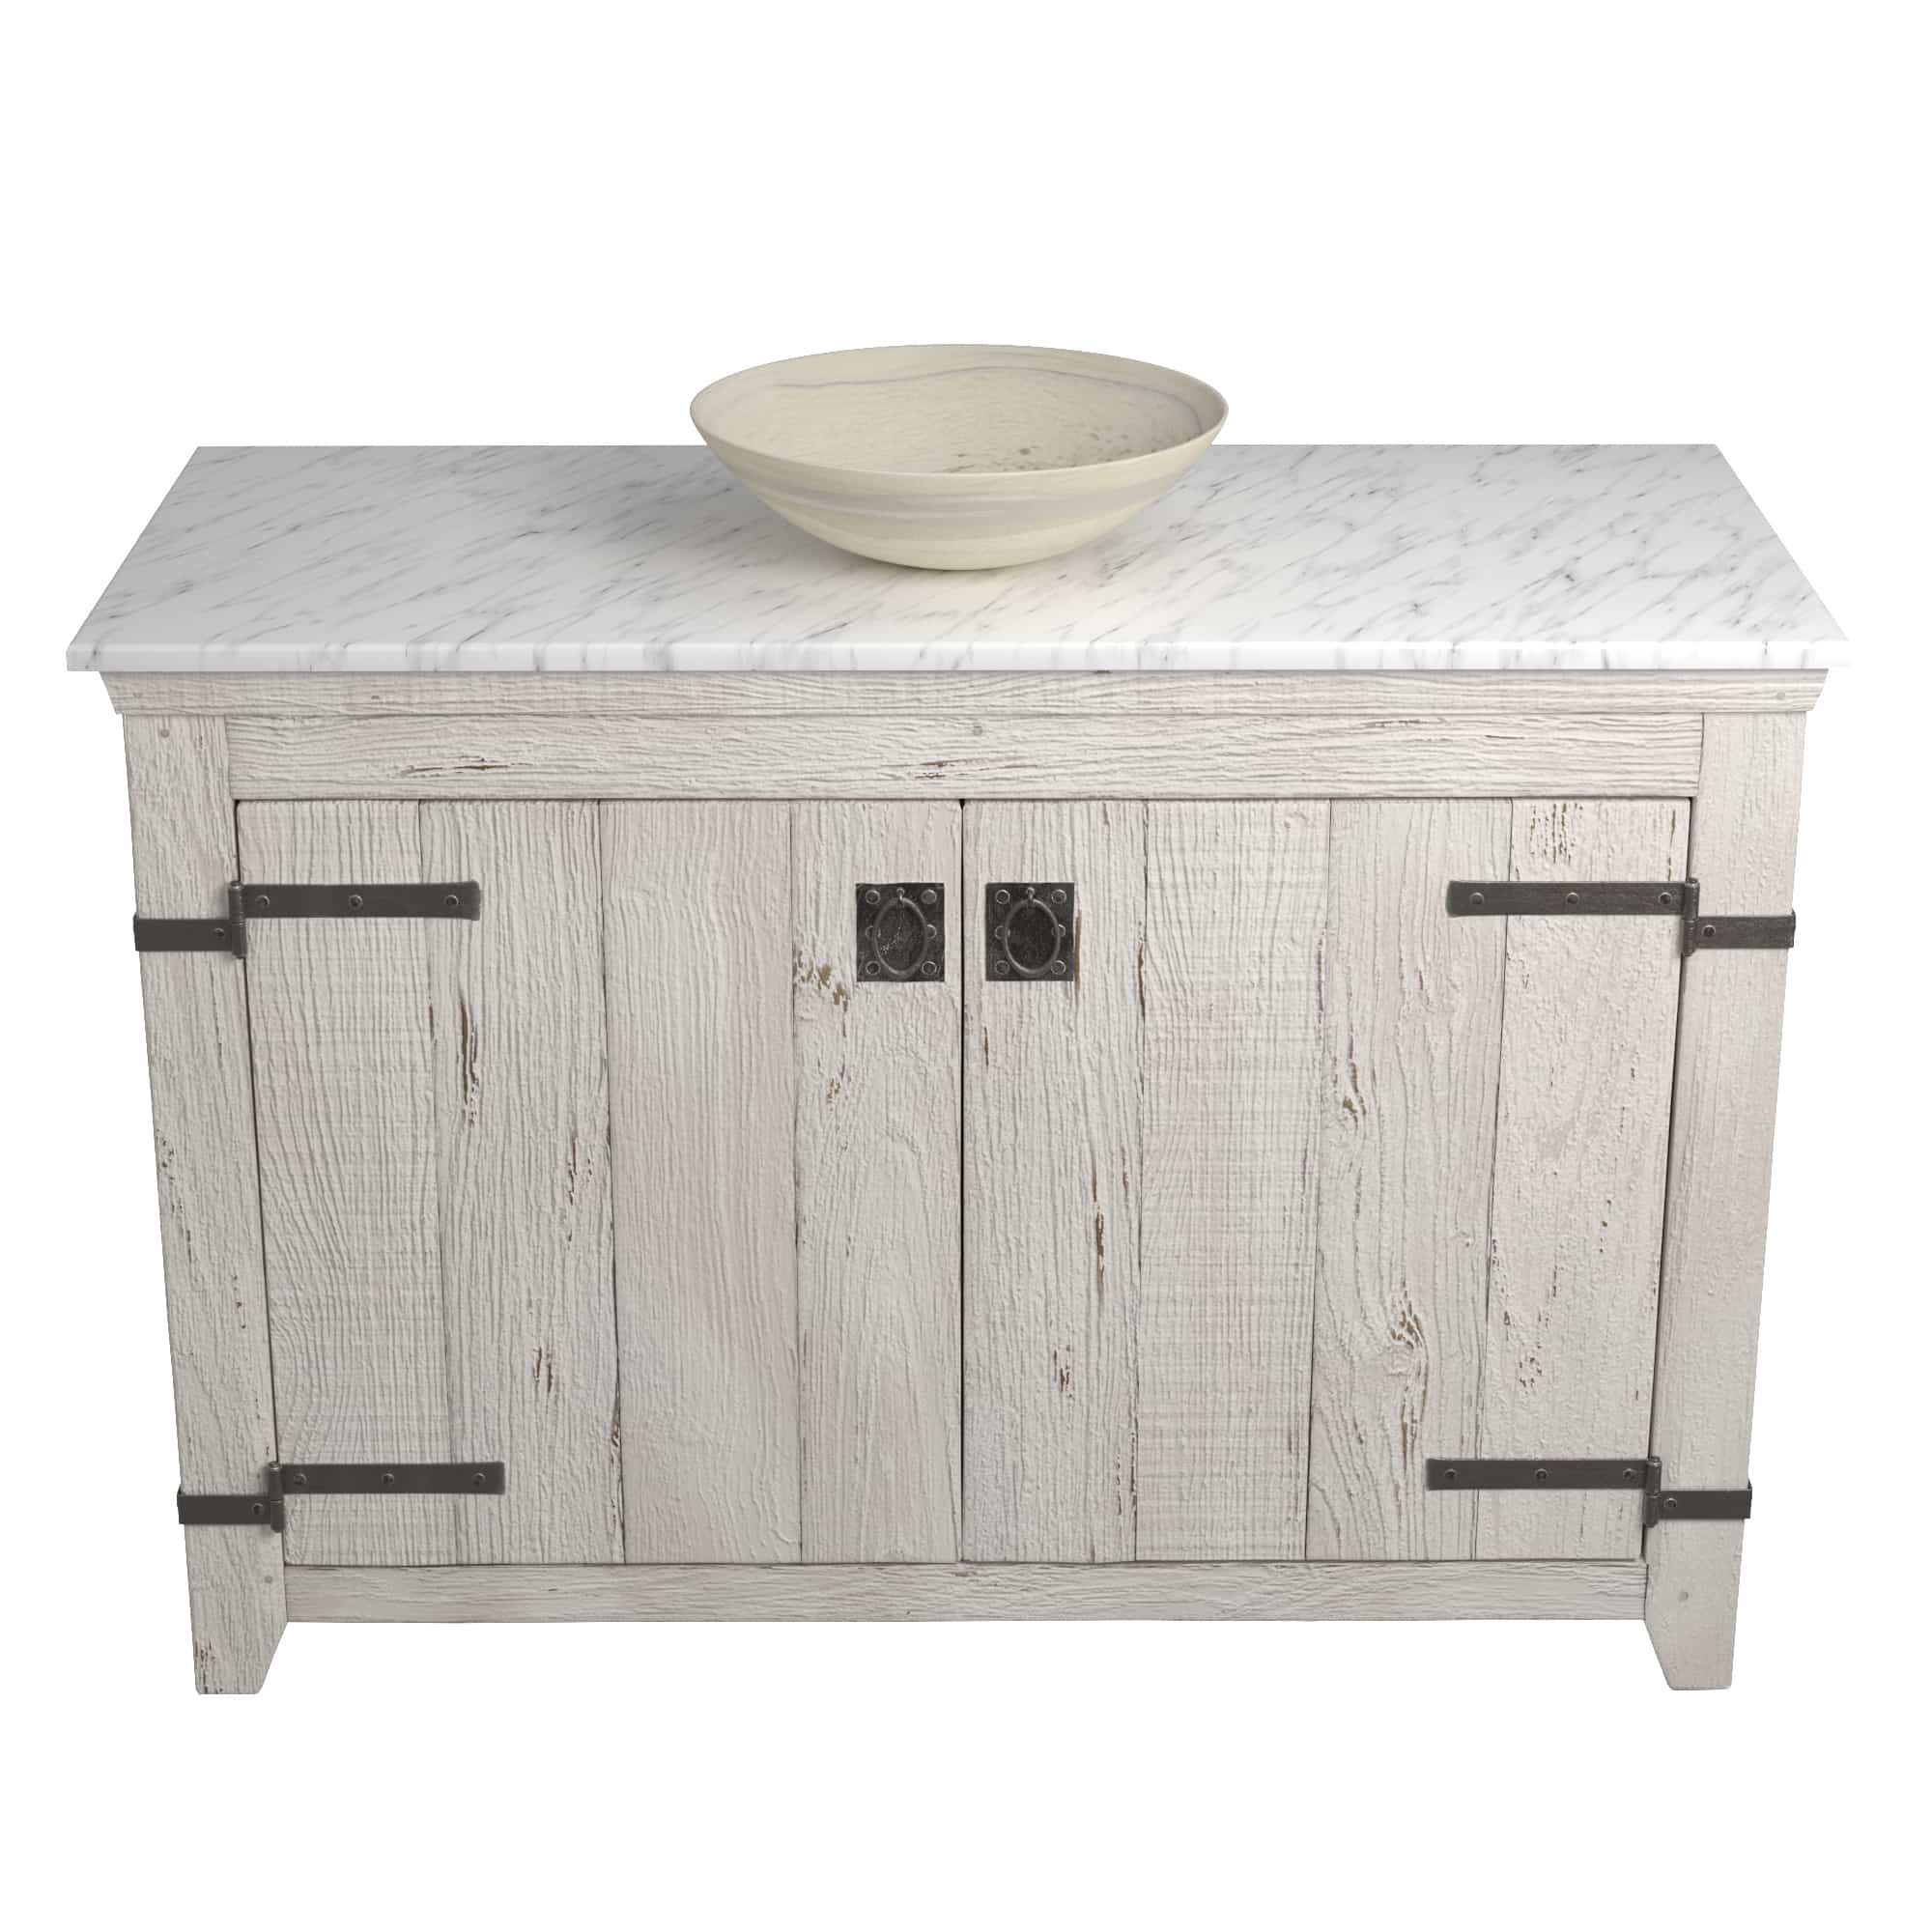 Native Trails 48" Americana Vanity in Whitewash with Carrara Marble Top and Verona in Beachcomber, Single Faucet Hole, BND48-VB-CT-MG-081